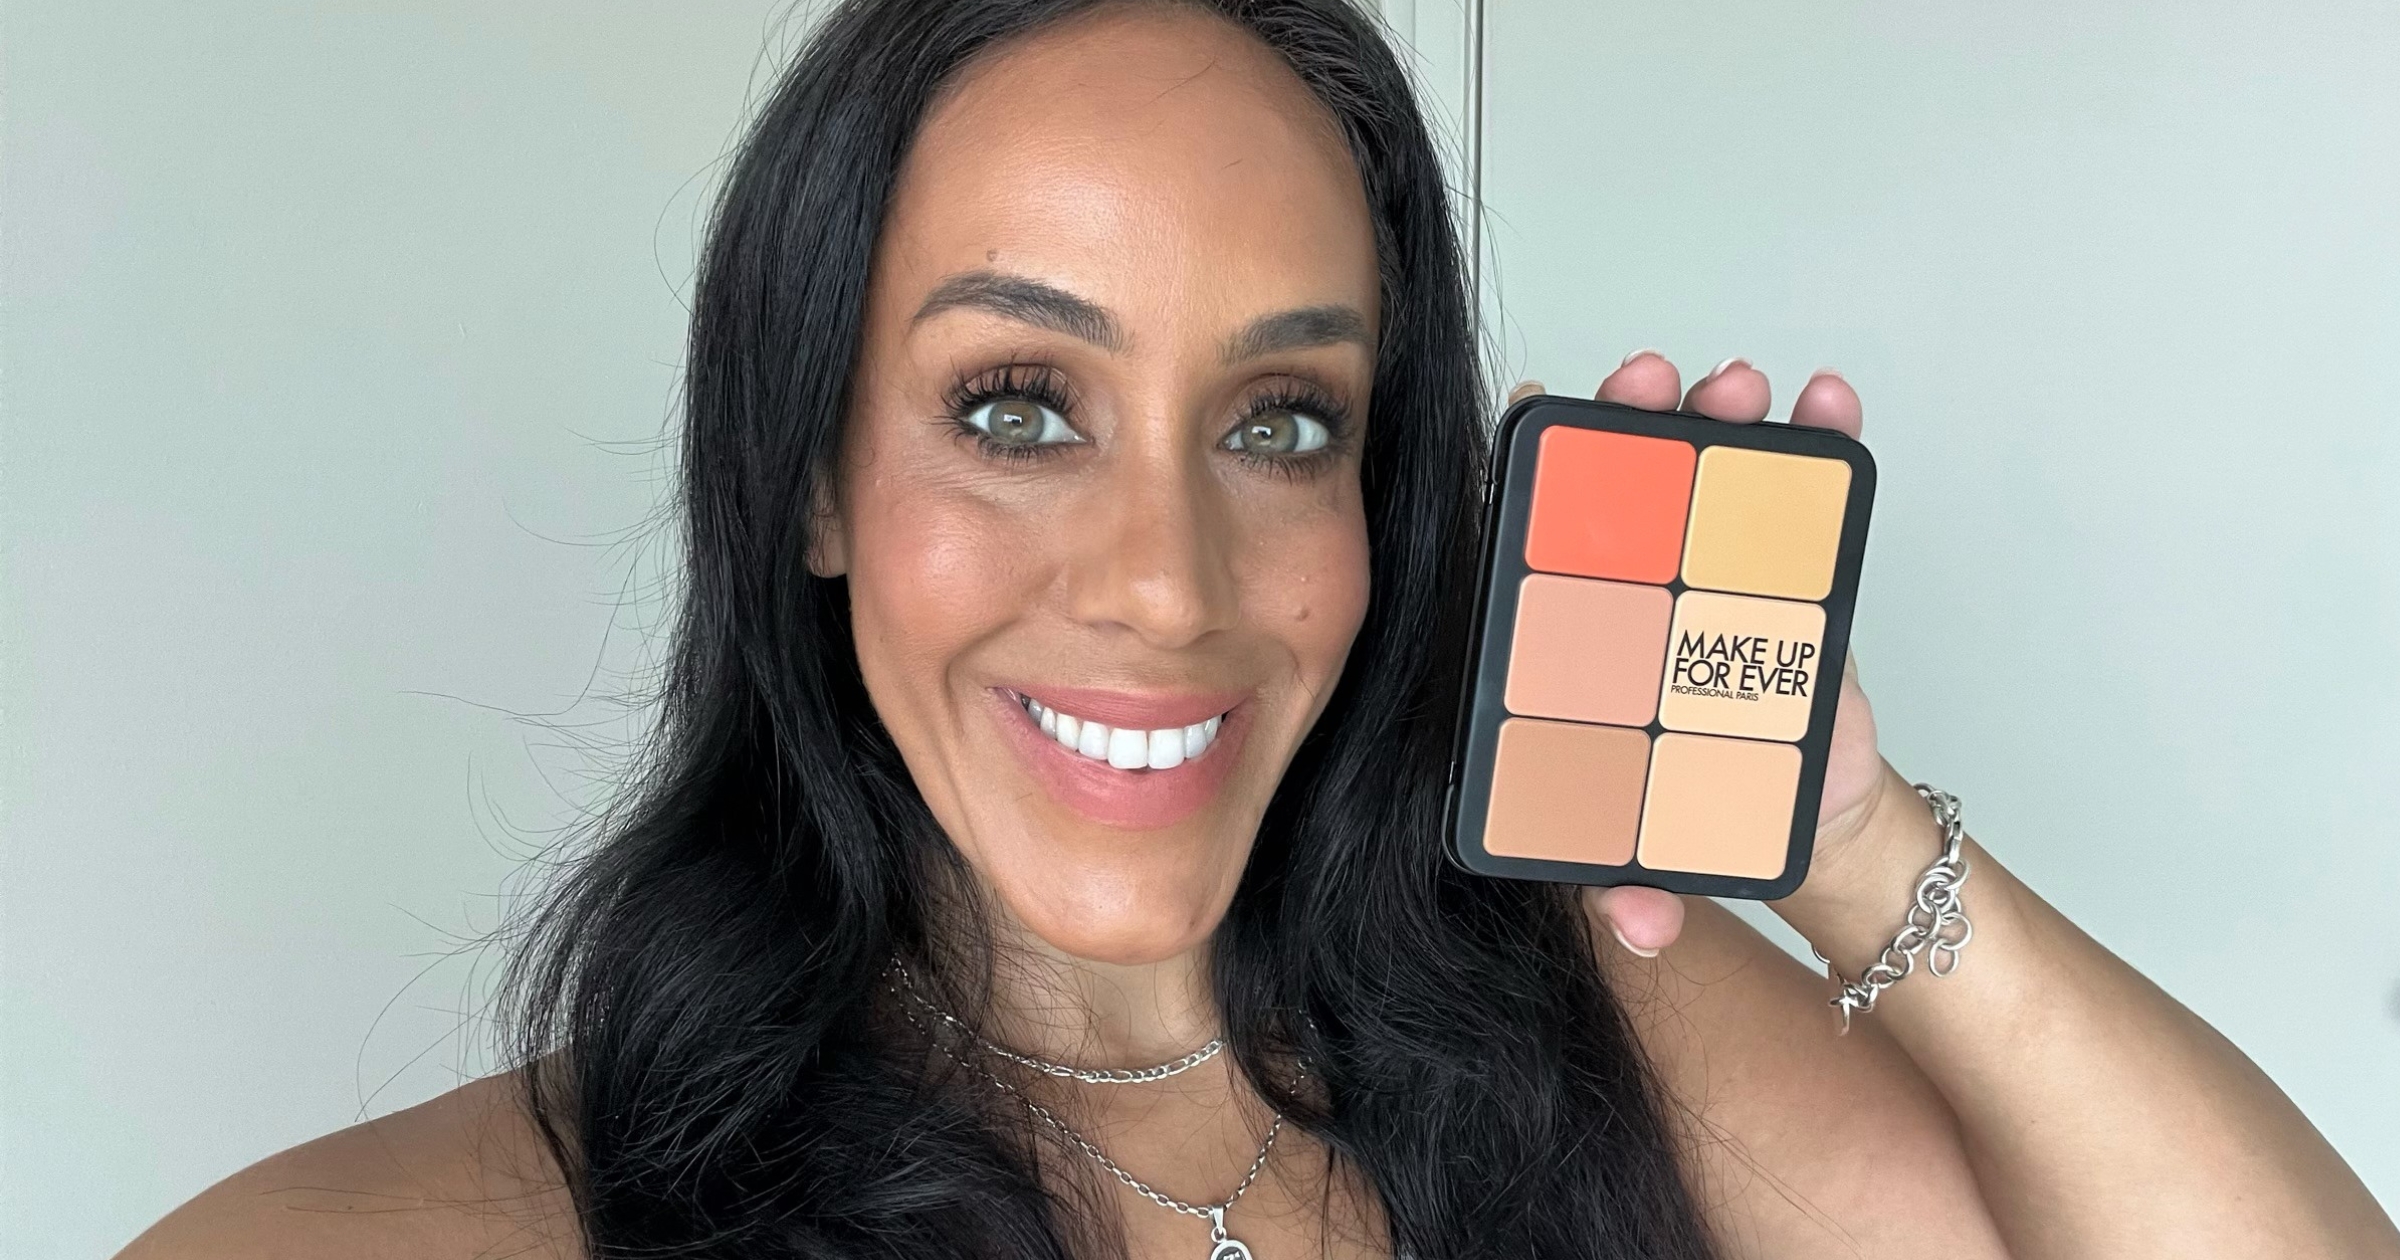 I Tried the MAKE UP FOR EVER All-in-One Cream Makeup Palette Going